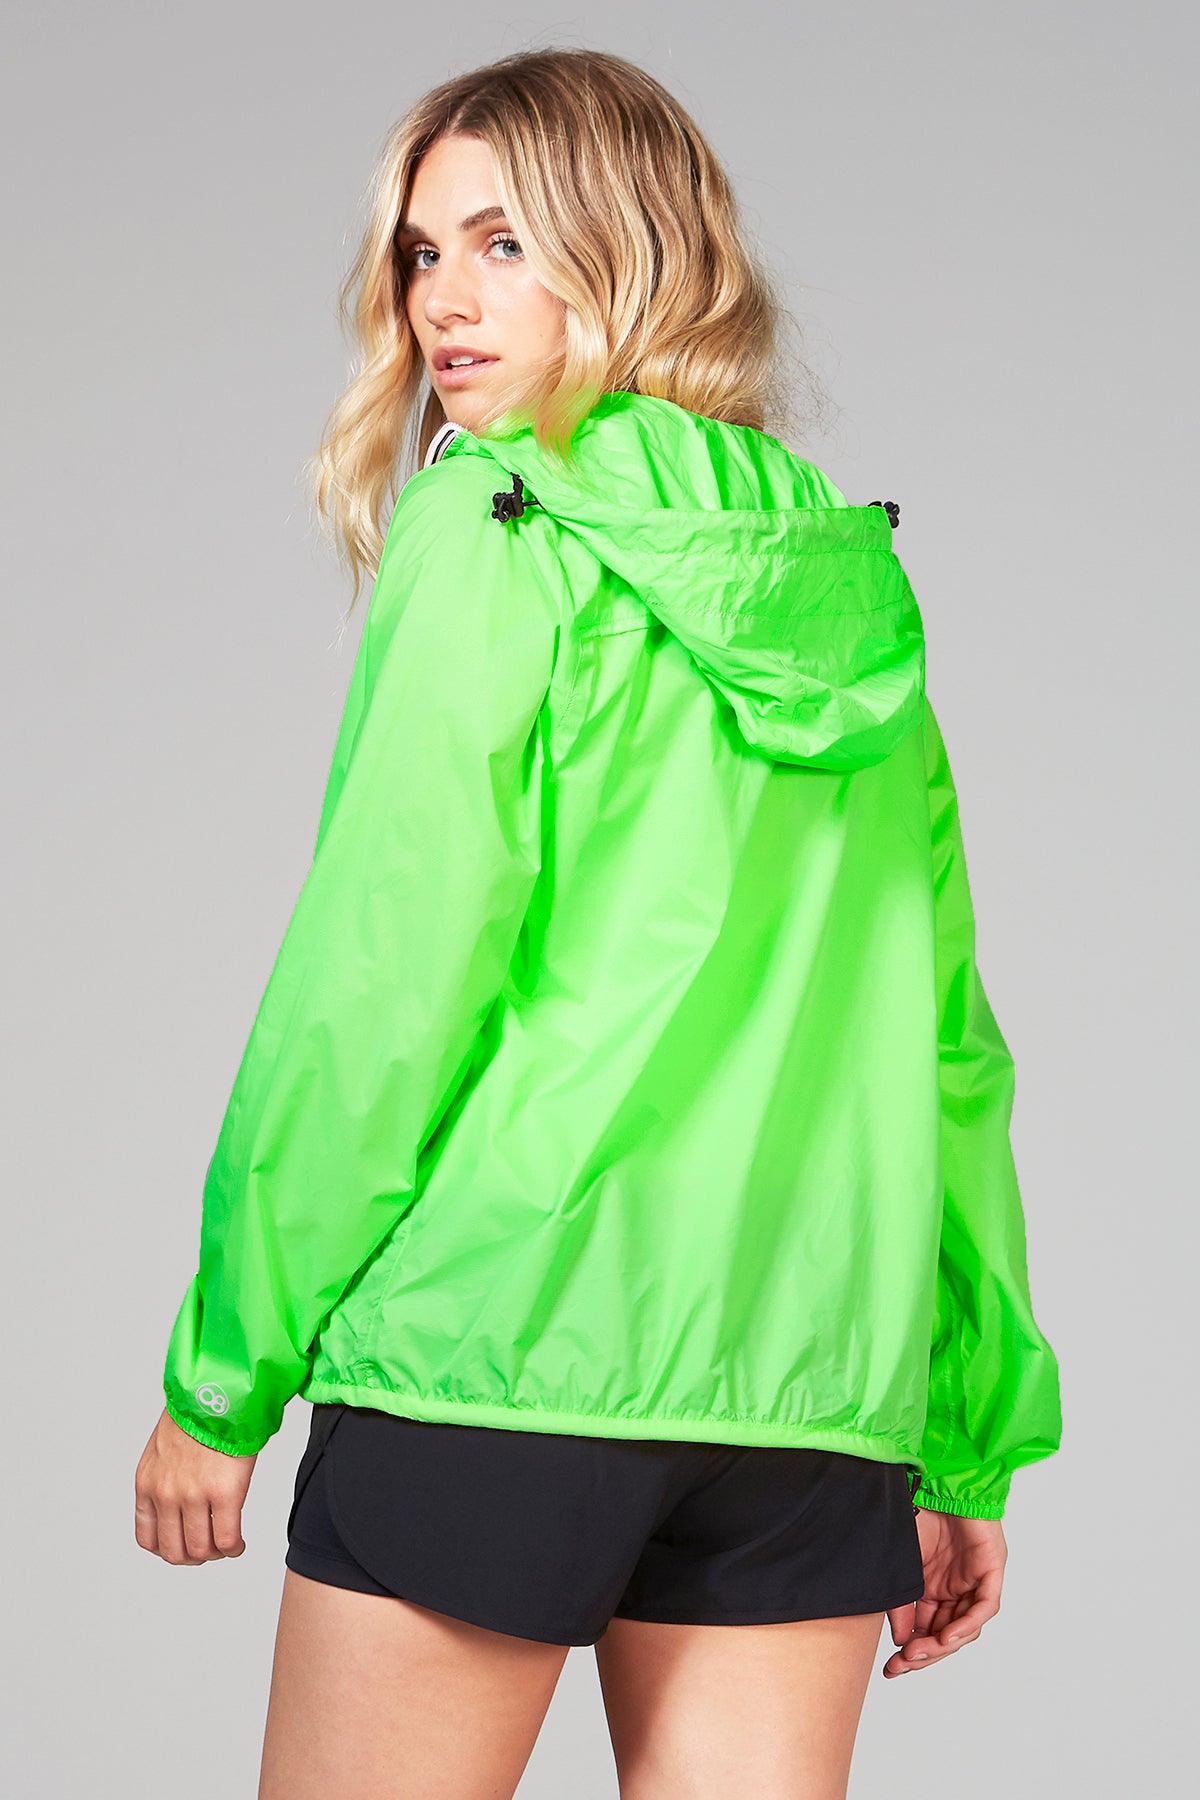 Max - green fluo full zip packable rain jacket - O8lifestyle.